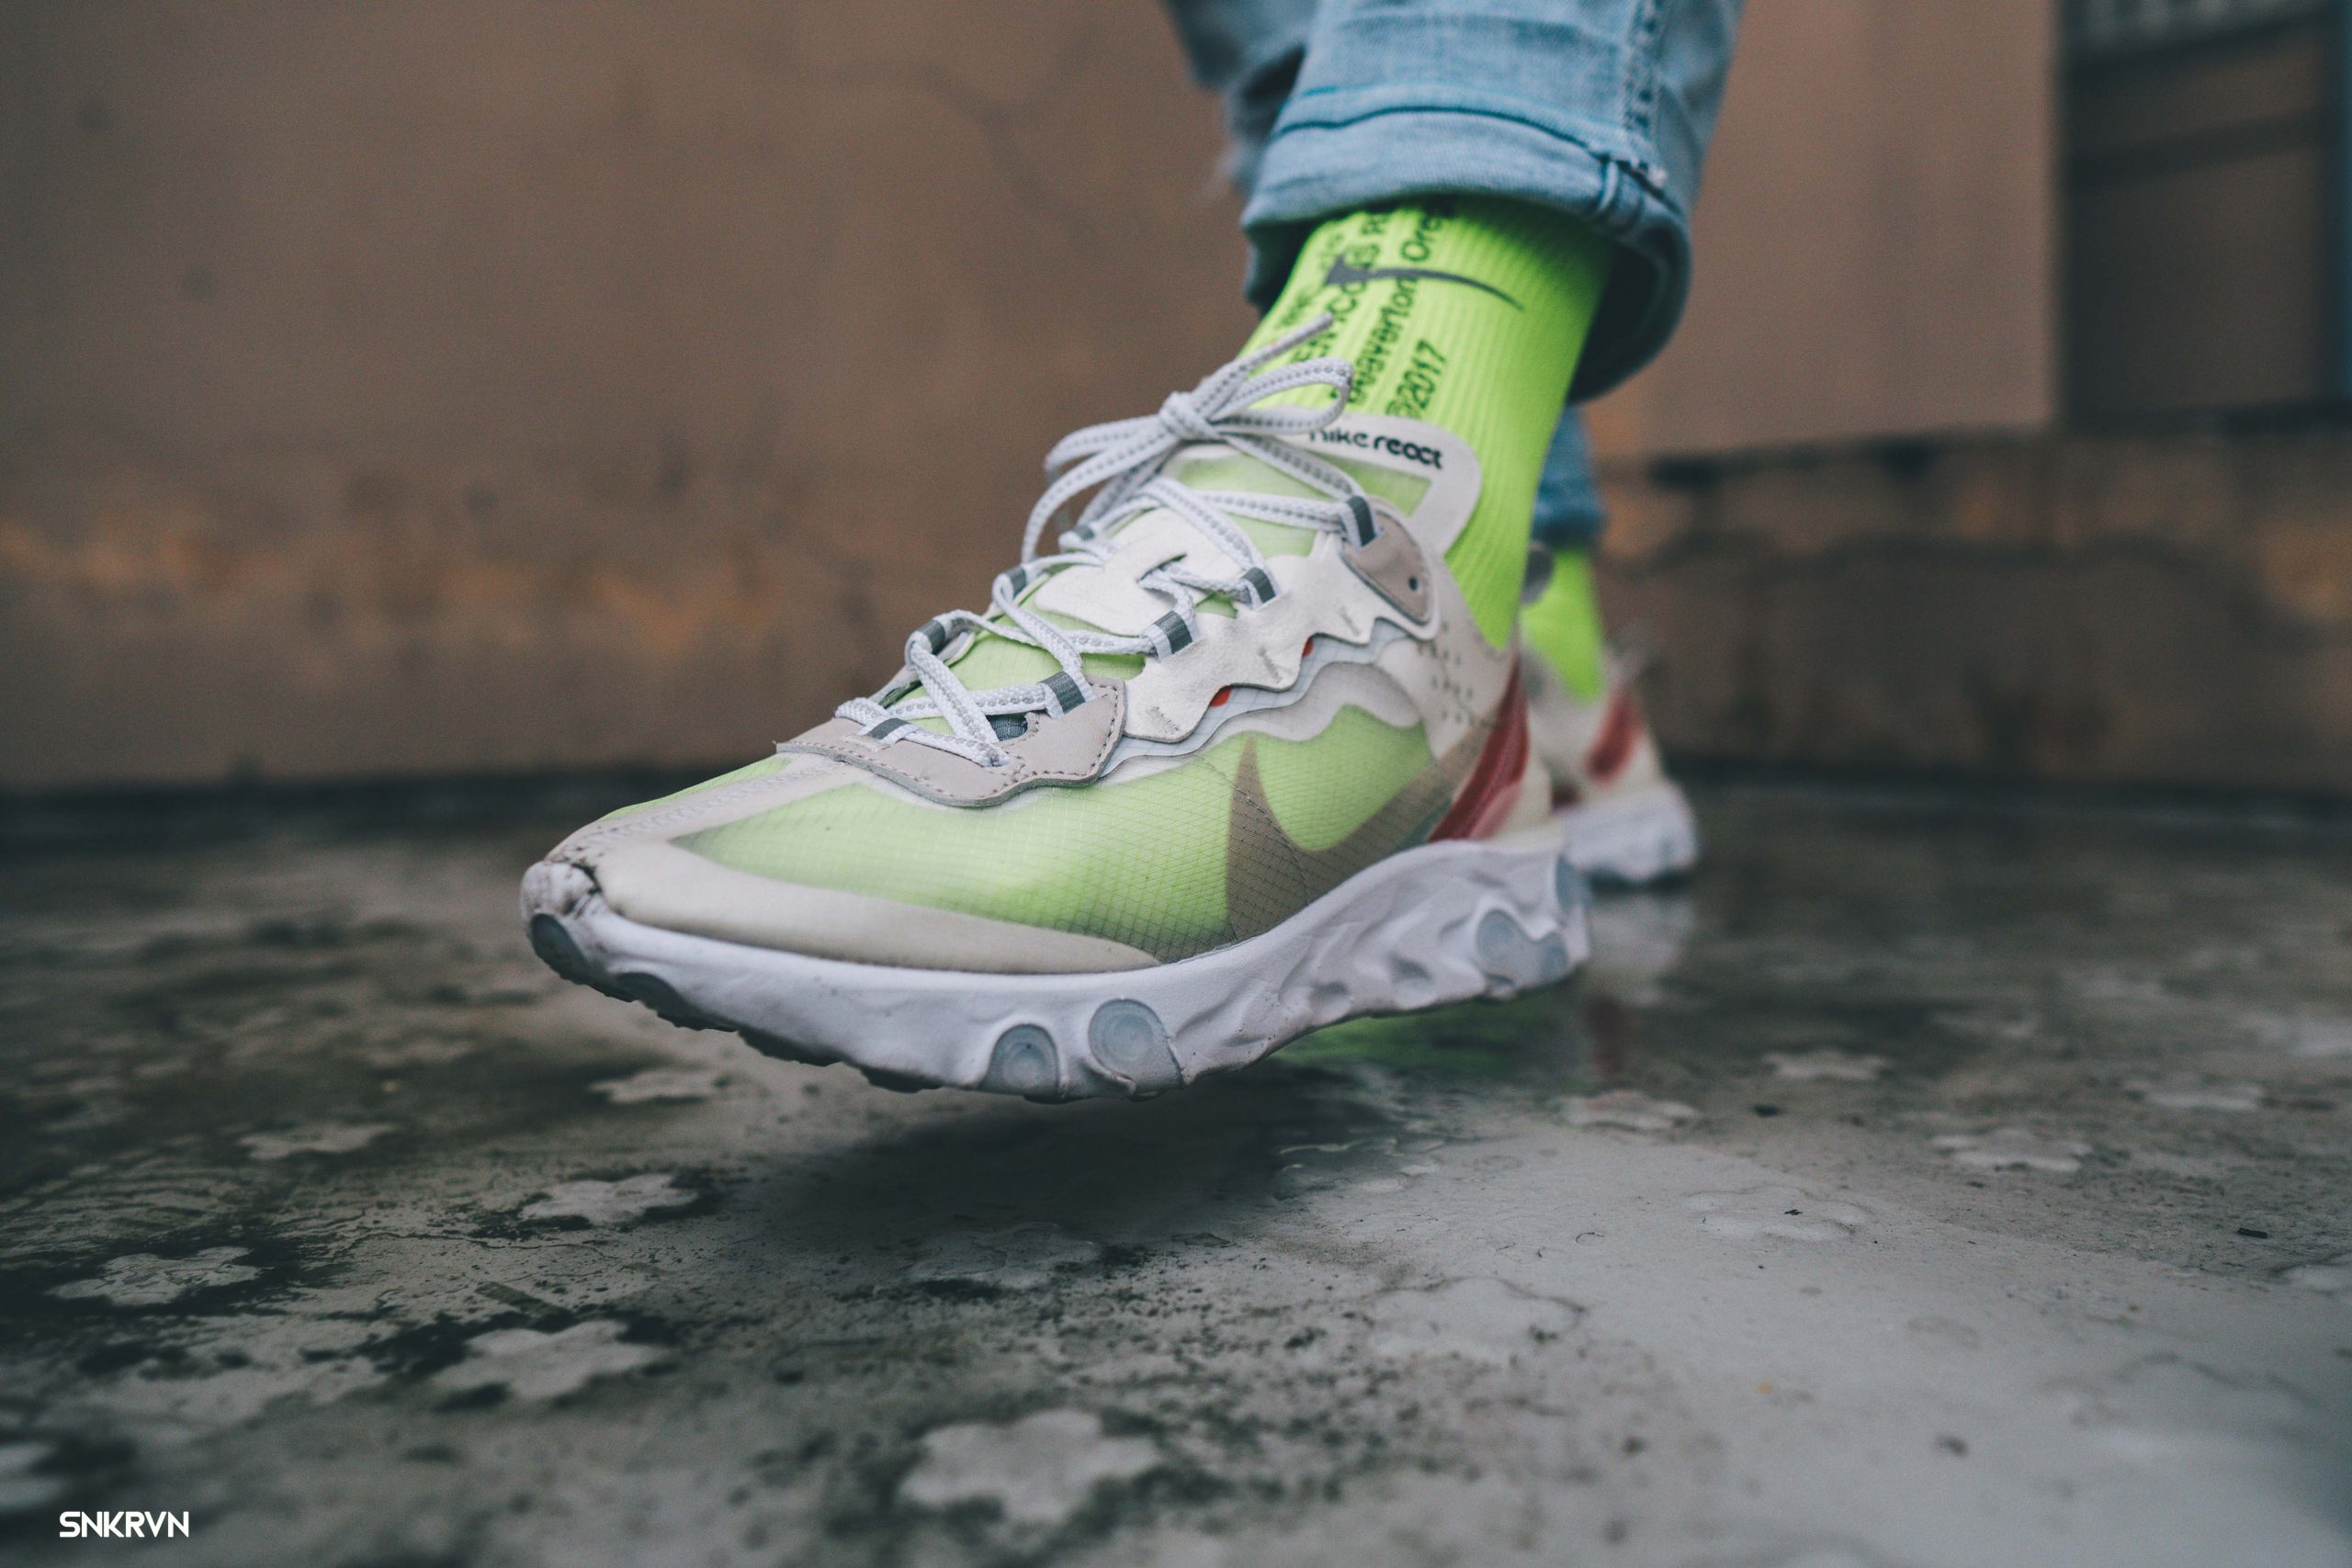 Hot Hot !!  On hand the most hype shoe today - Nike React Element 87